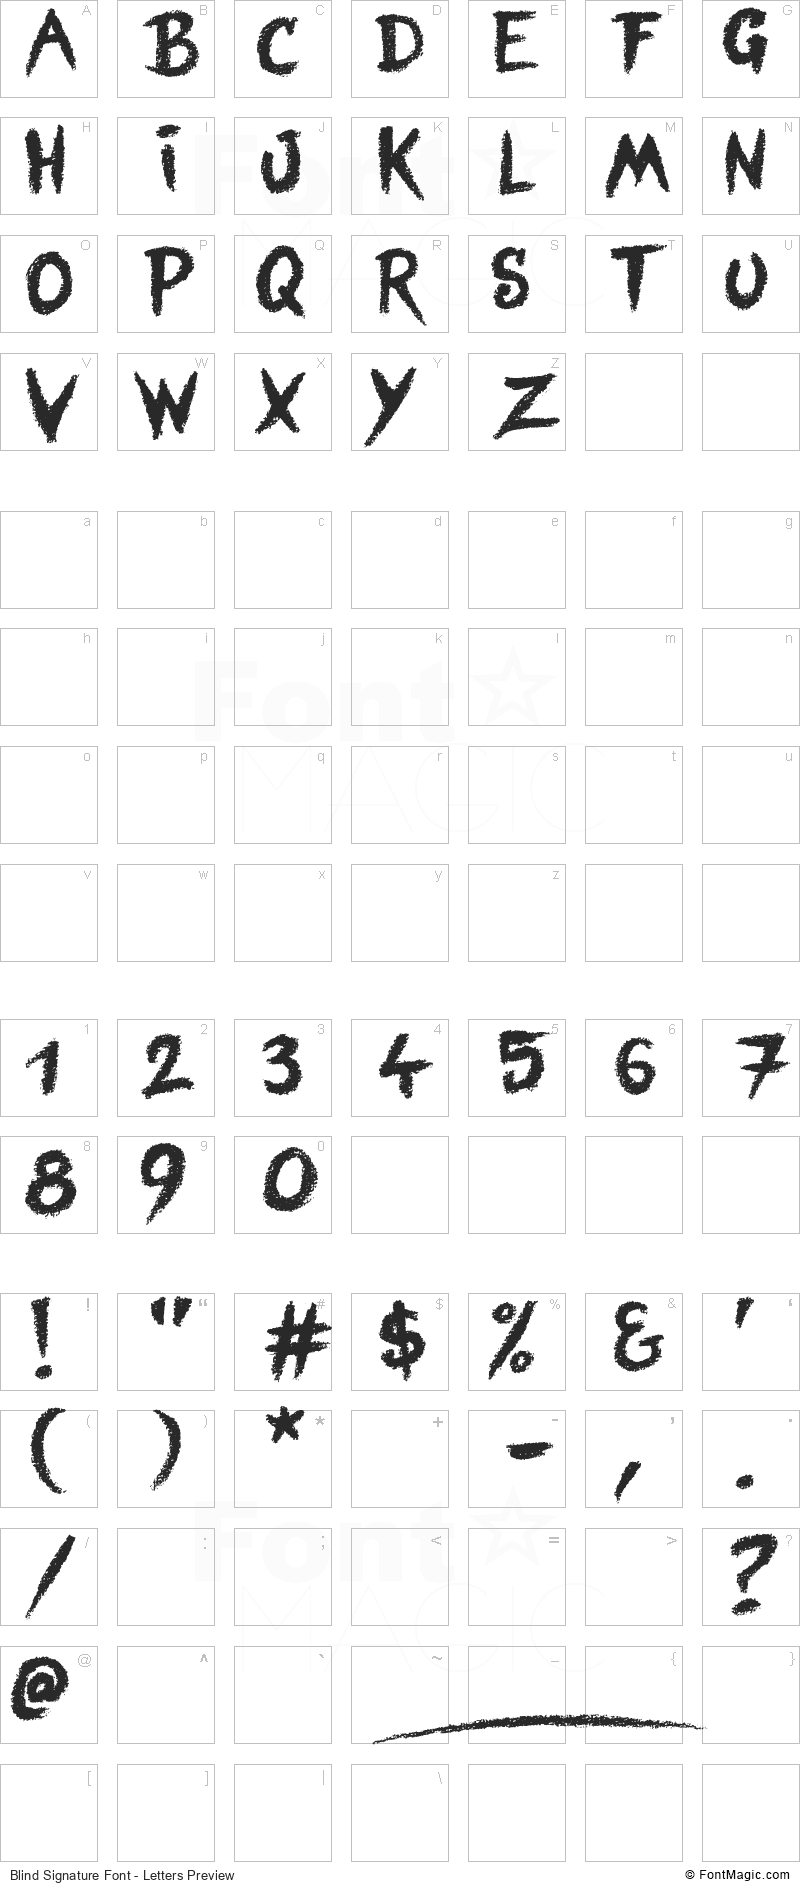 Blind Signature Font - All Latters Preview Chart